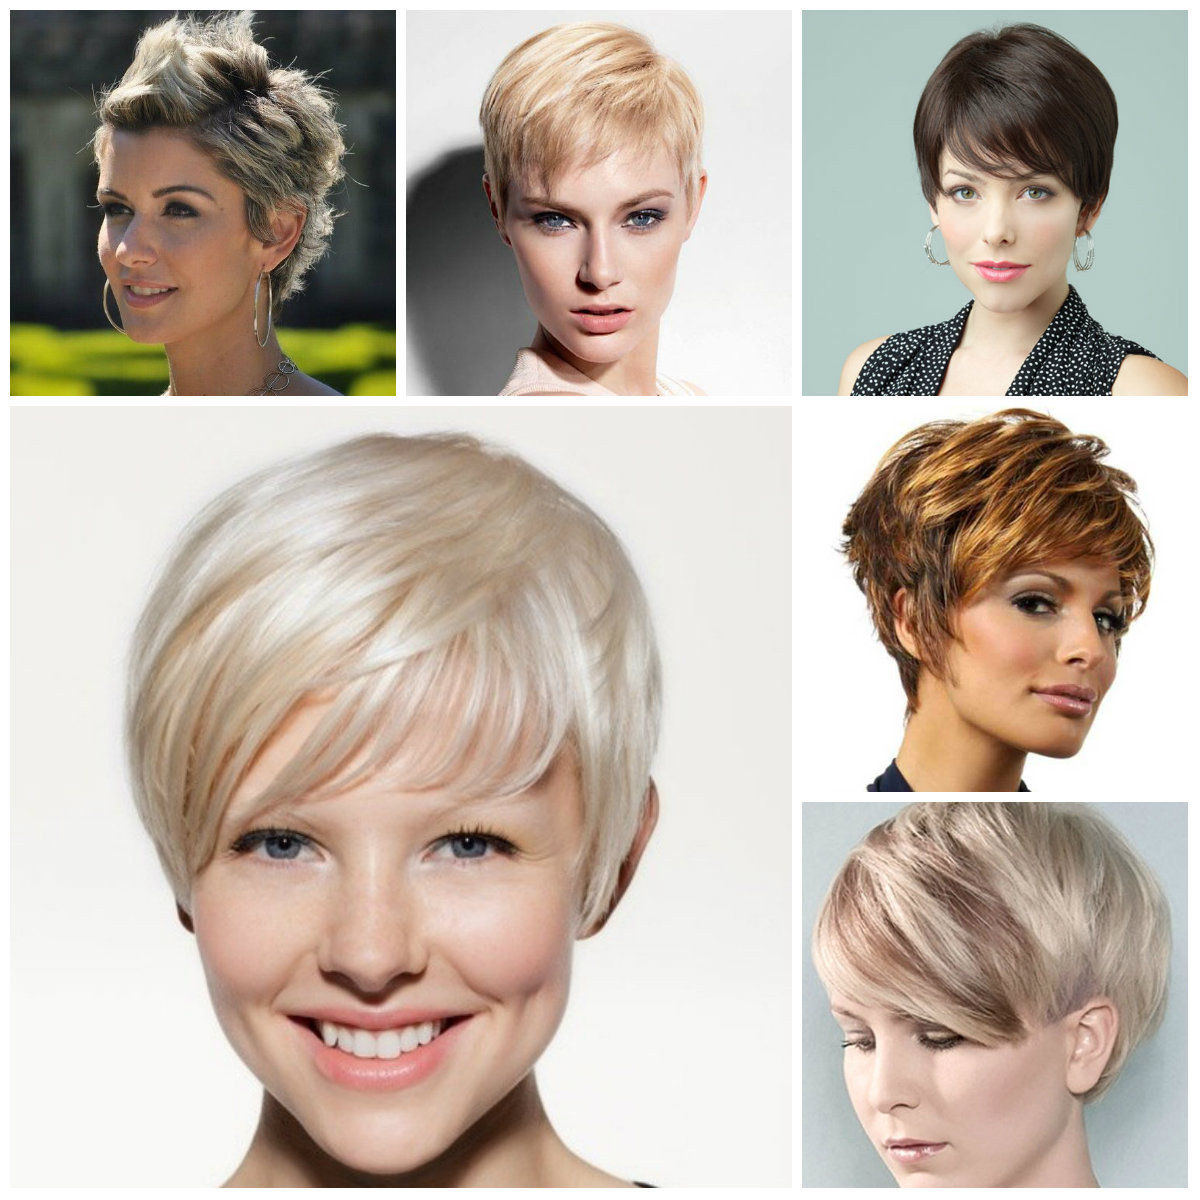 2019 Haircuts Hairstyles And Hair Colors